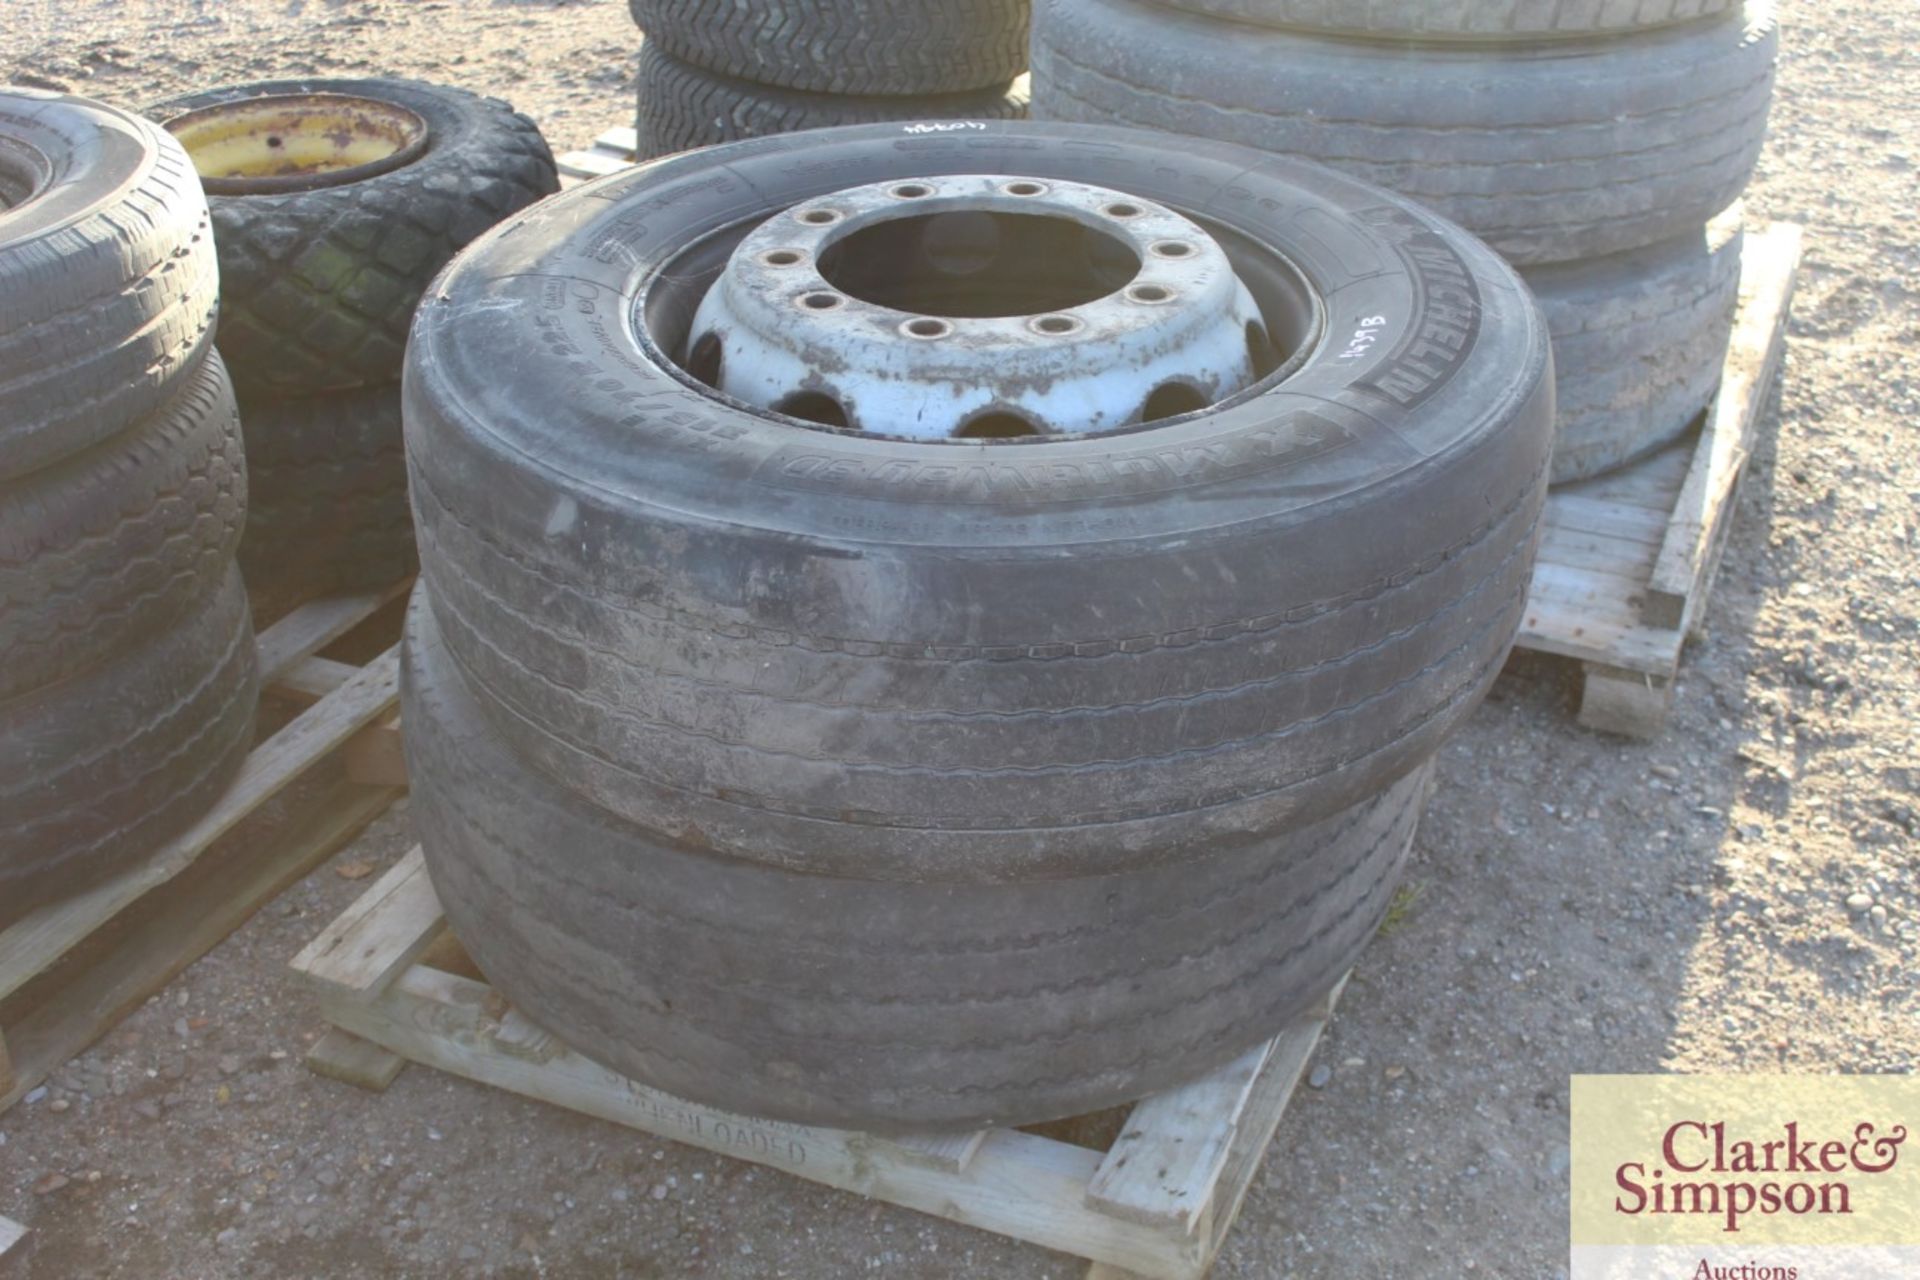 2x 315/70R22.5 10 stud wheels and tyres. - Image 2 of 2